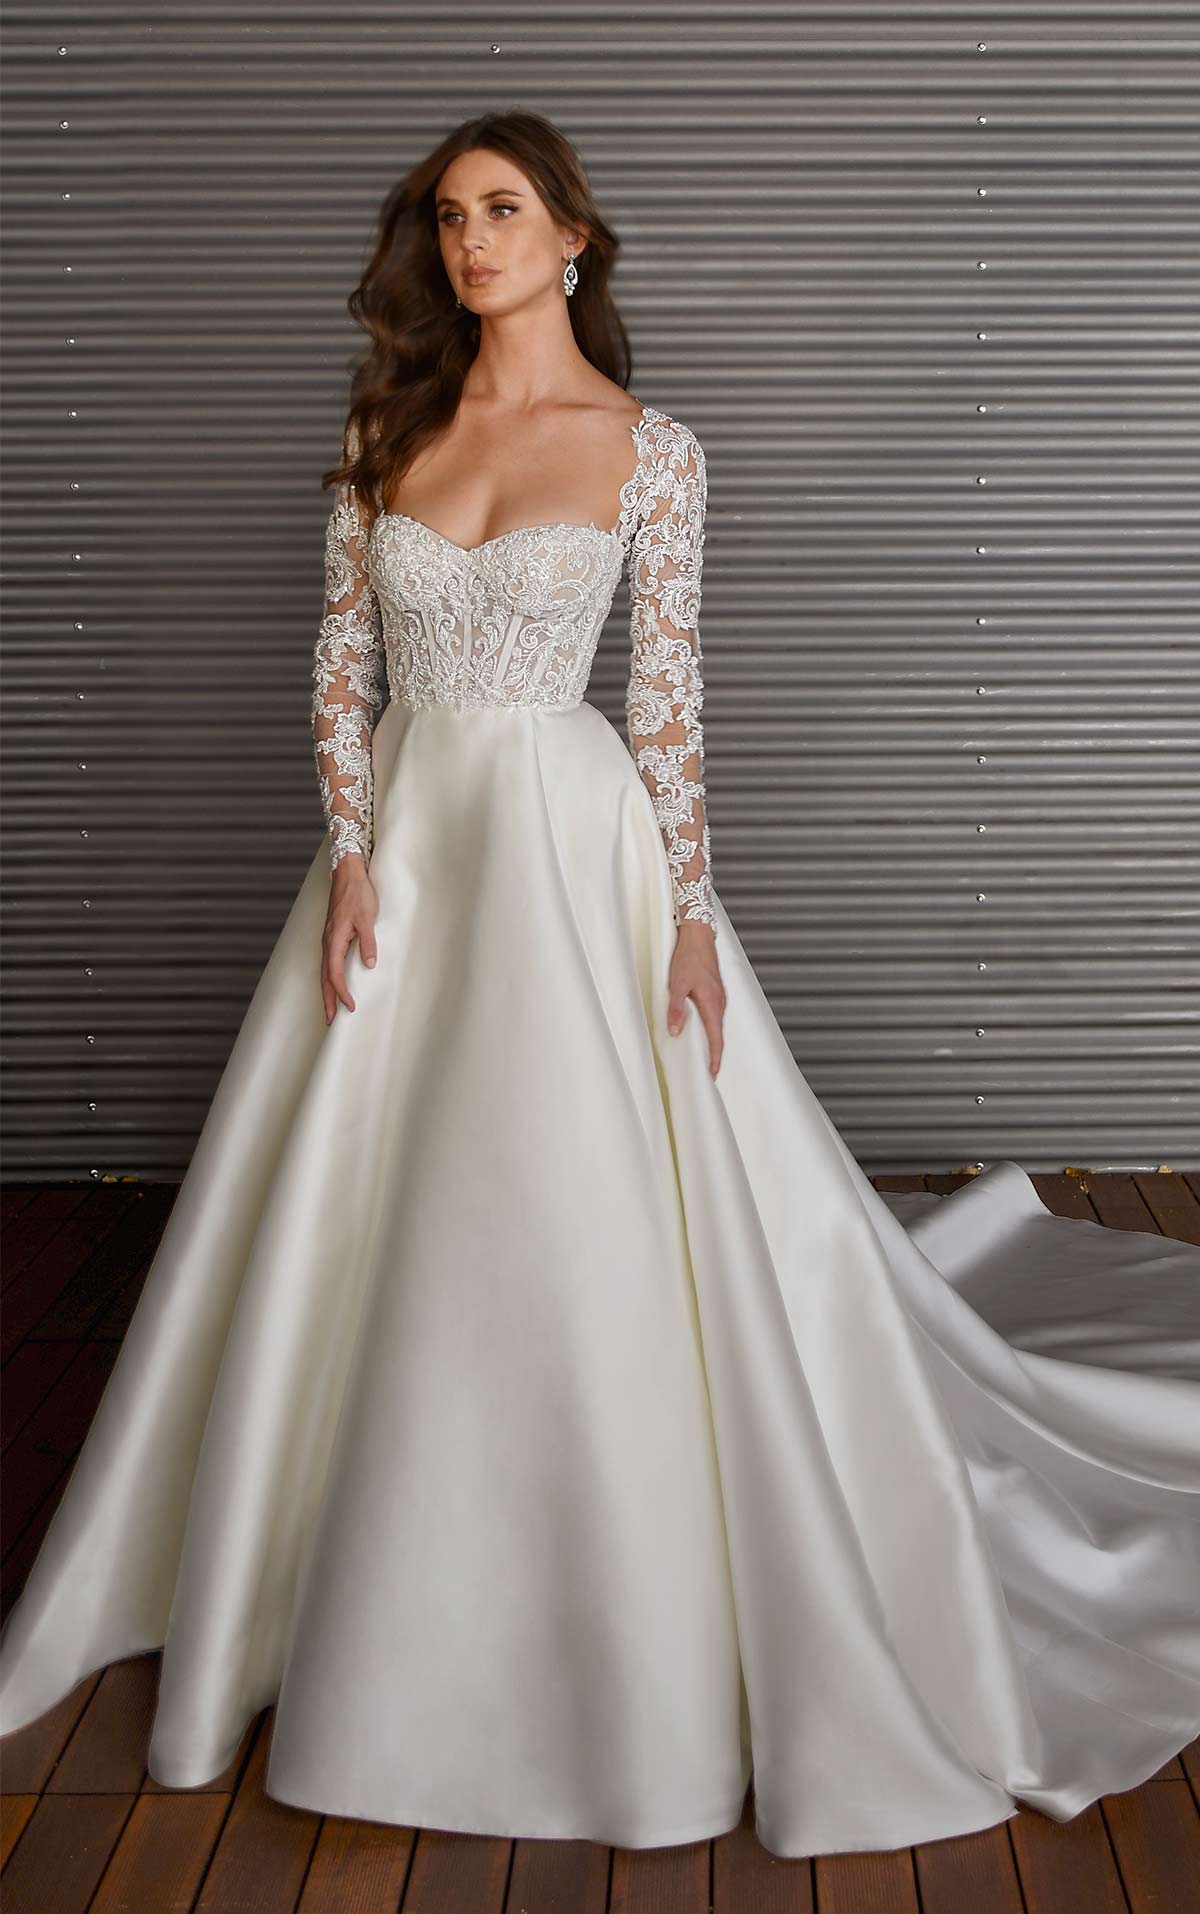 Classic Ball Gown Wedding Dress With Sweetheart Neckline And